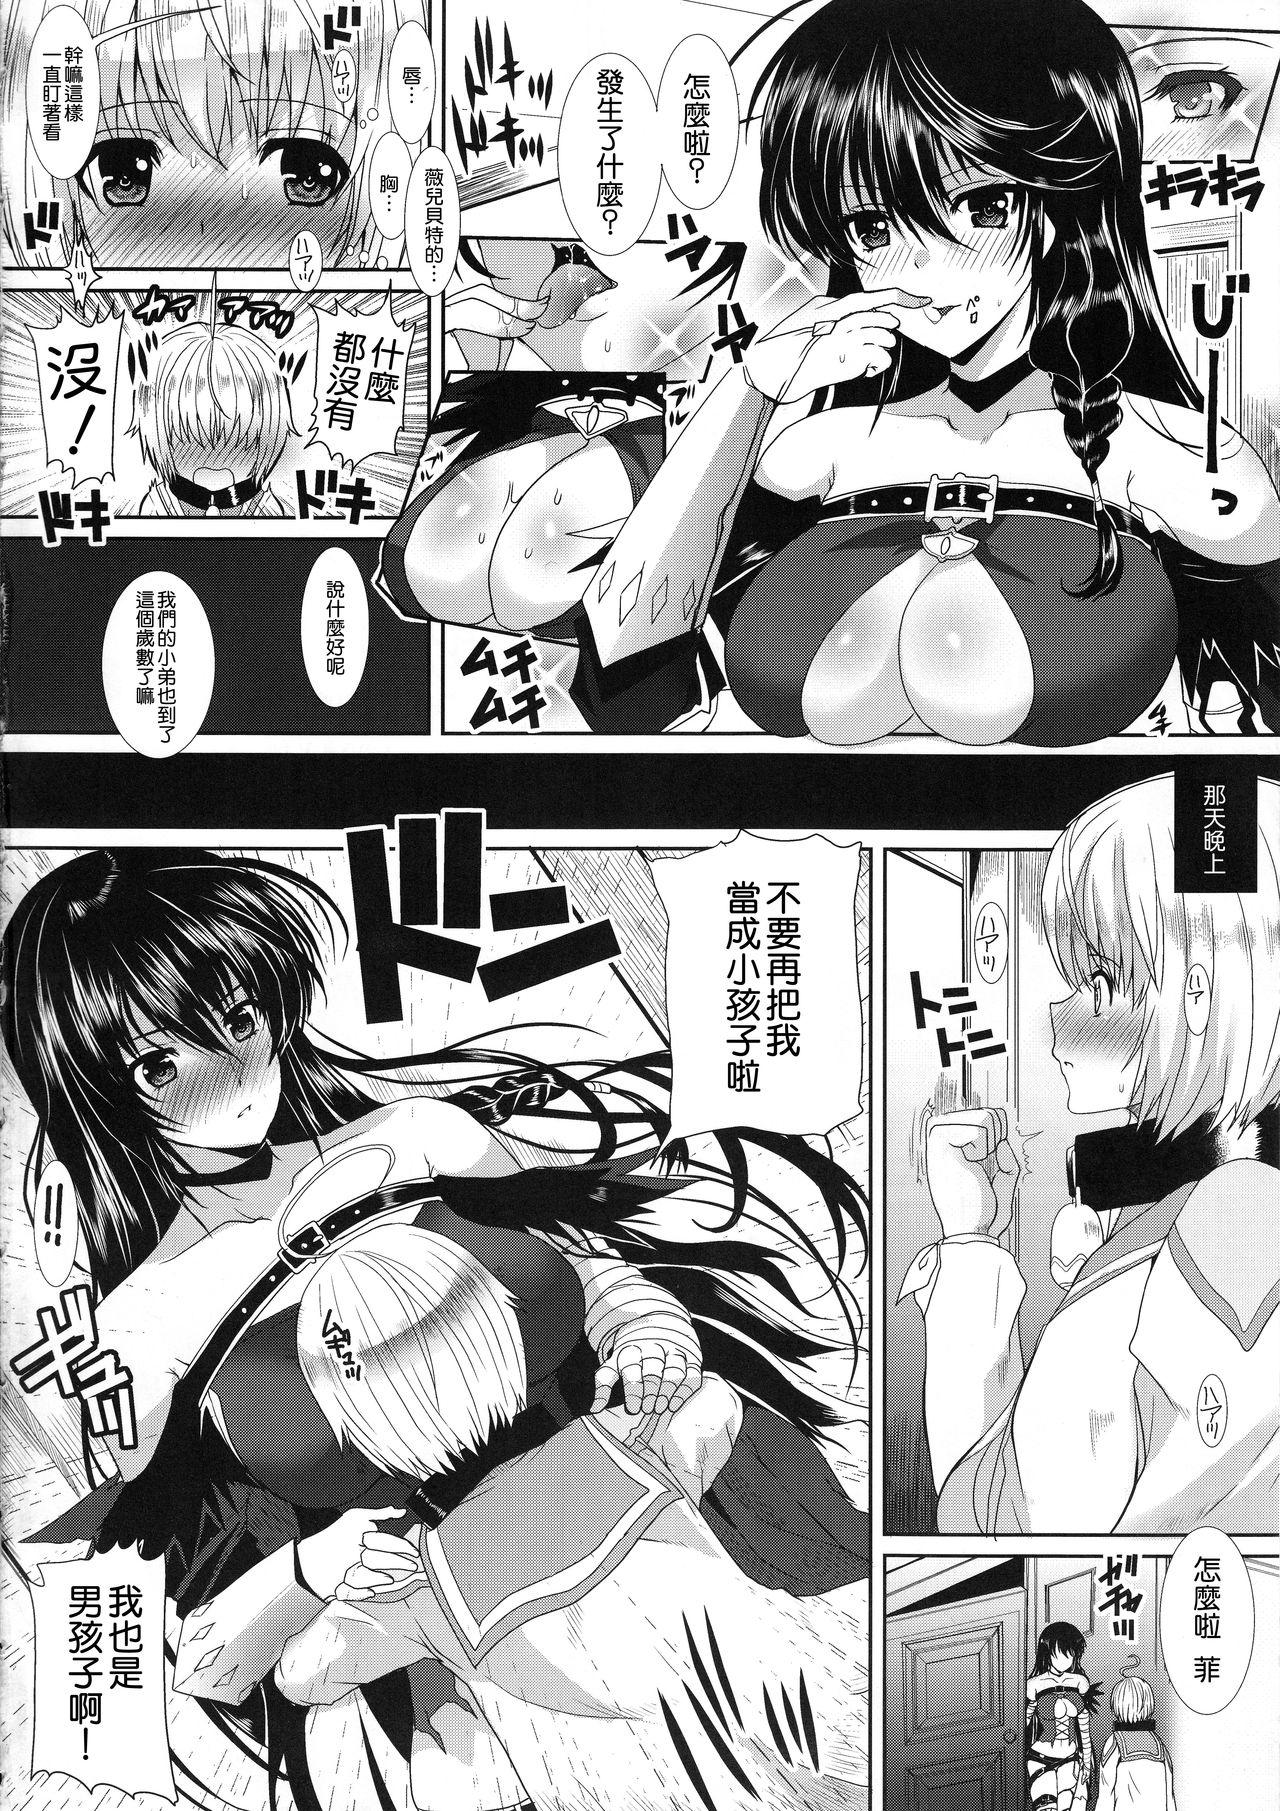 Cheating Wife Velvet Night - Tales of berseria Couples - Page 4